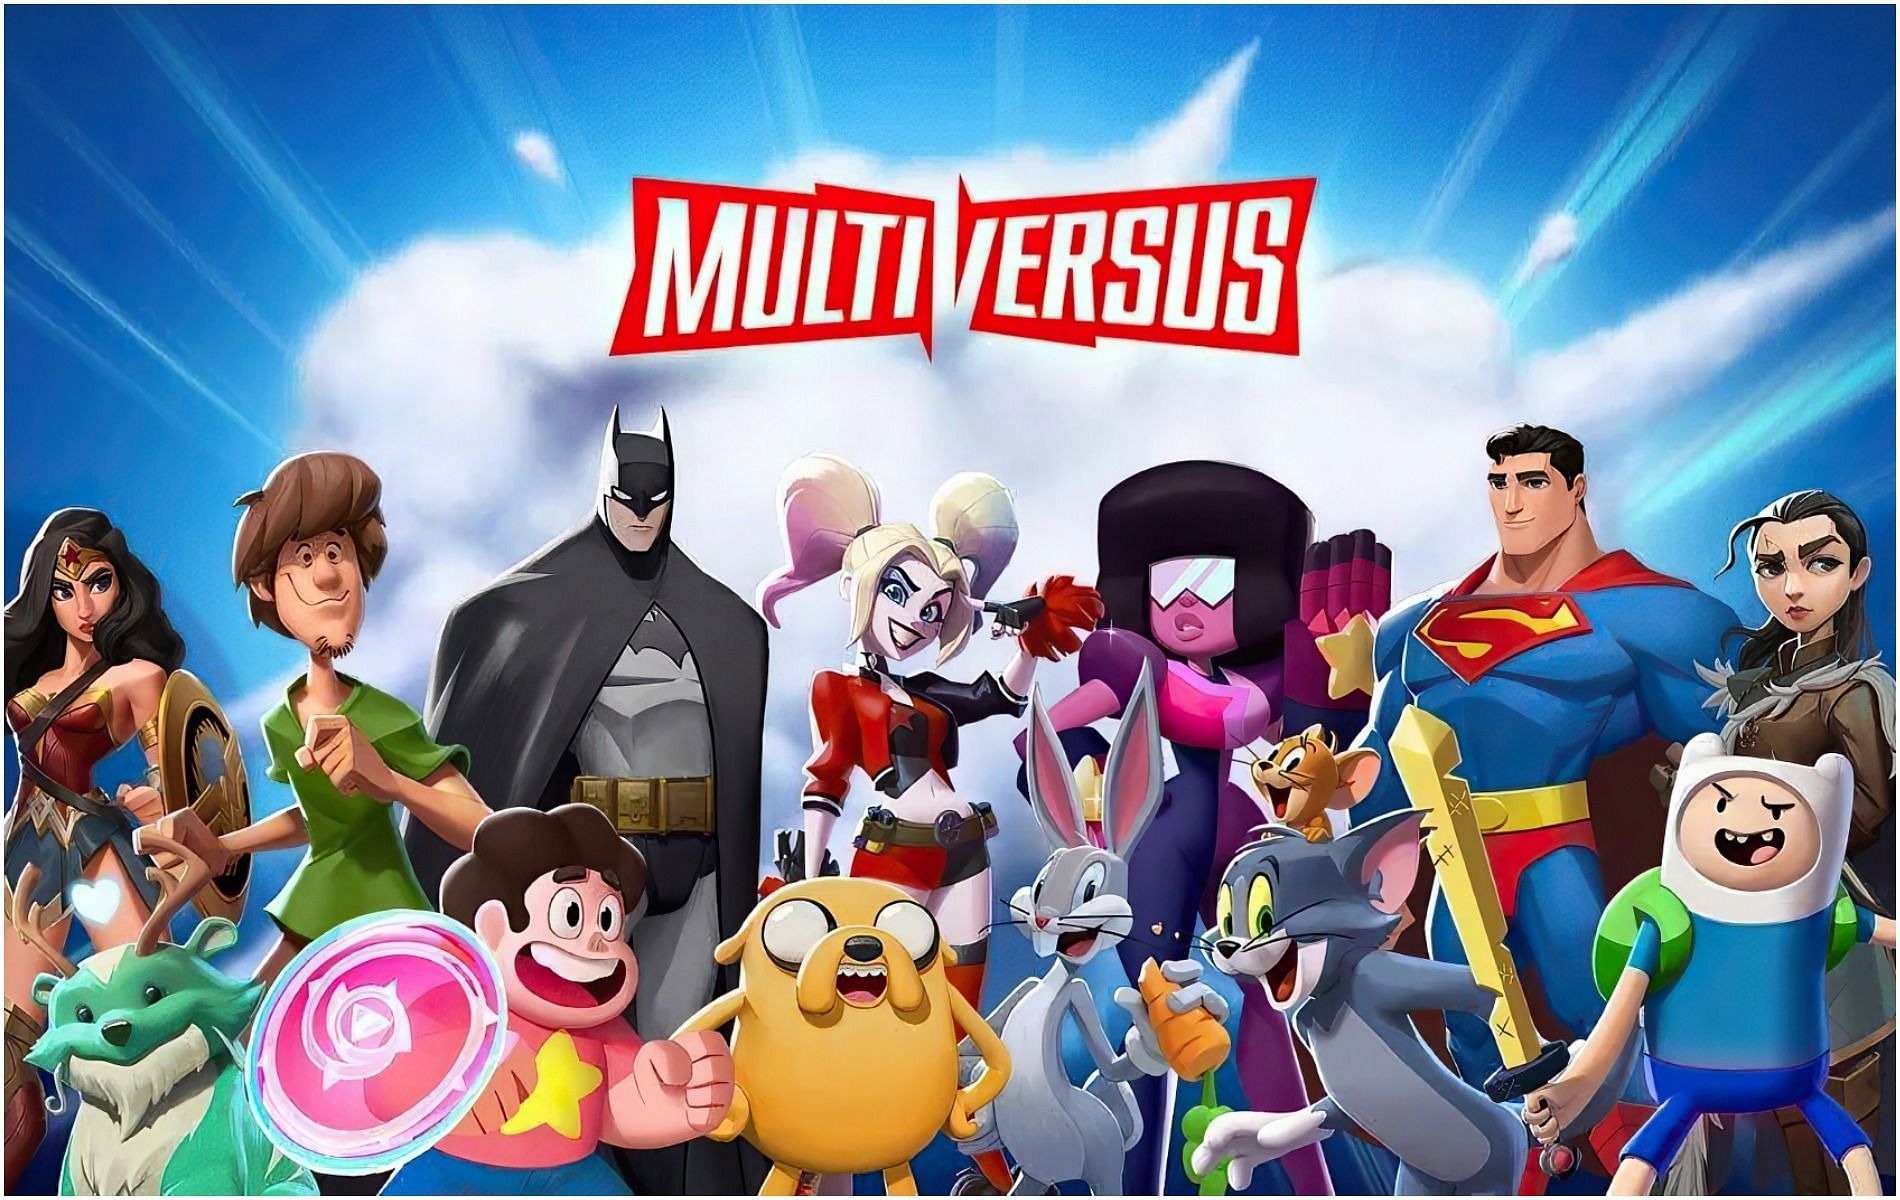 How To Create & Connect WB Games Account In Multiversus